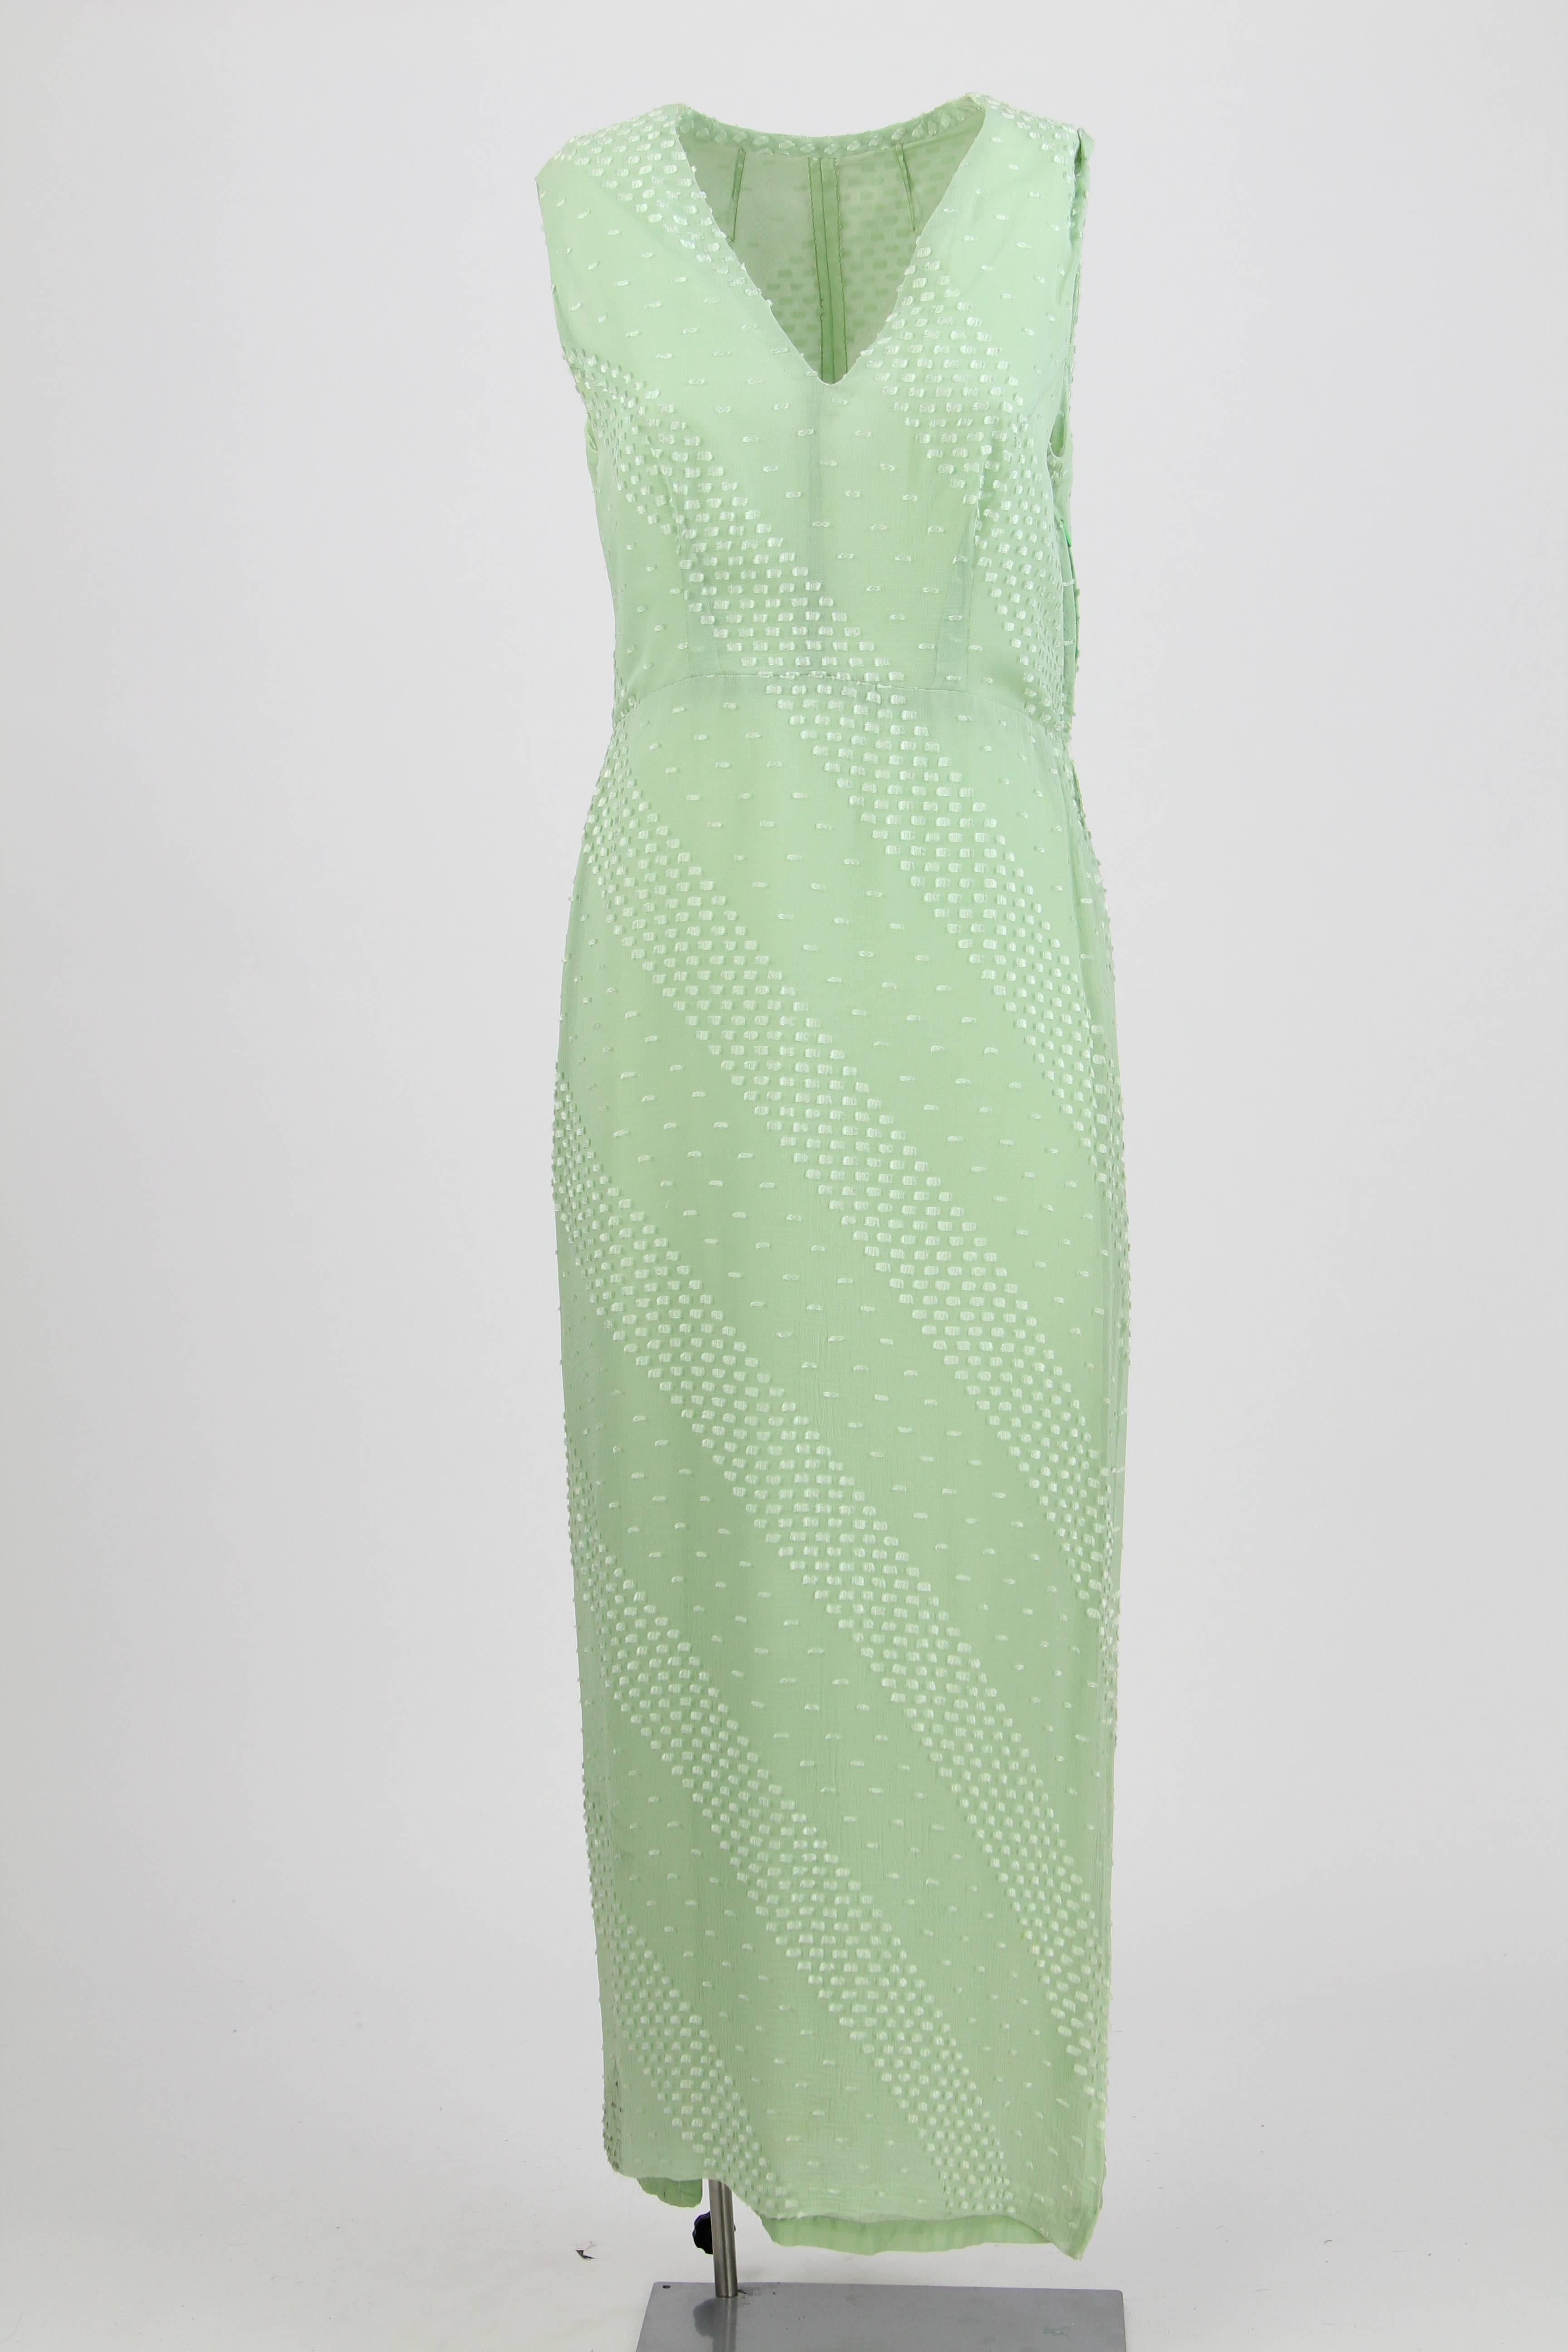 Ethereal tailored sleeveless silk dress in mint green color with V neckline and a characteristic embroidery. It features a regular waist, and comes with a sleeved jacket in the same fabric trimmed with mint green feathers. The dress has a zip on one